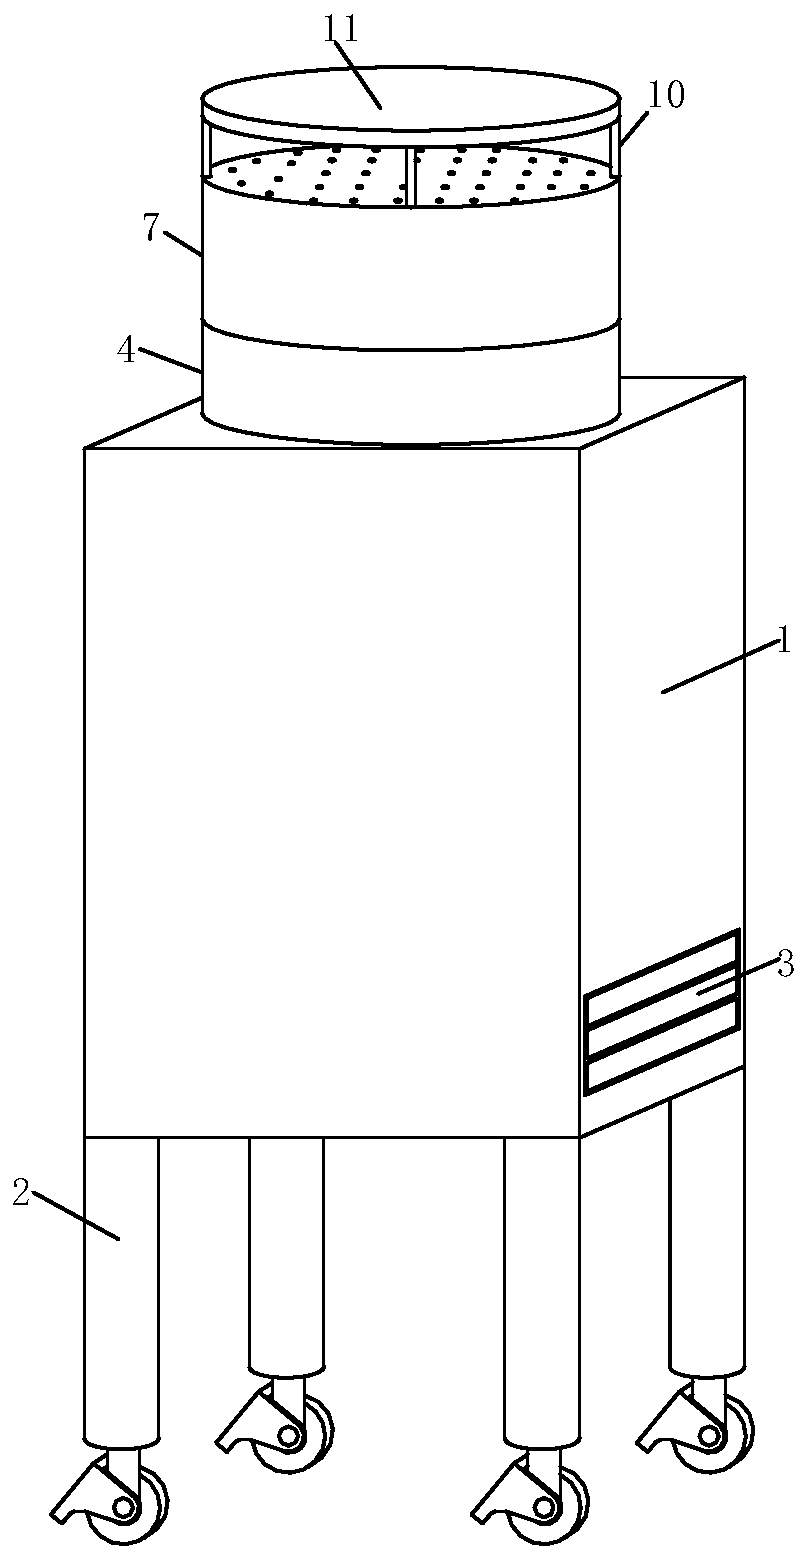 Air purifier for removing formaldehyde